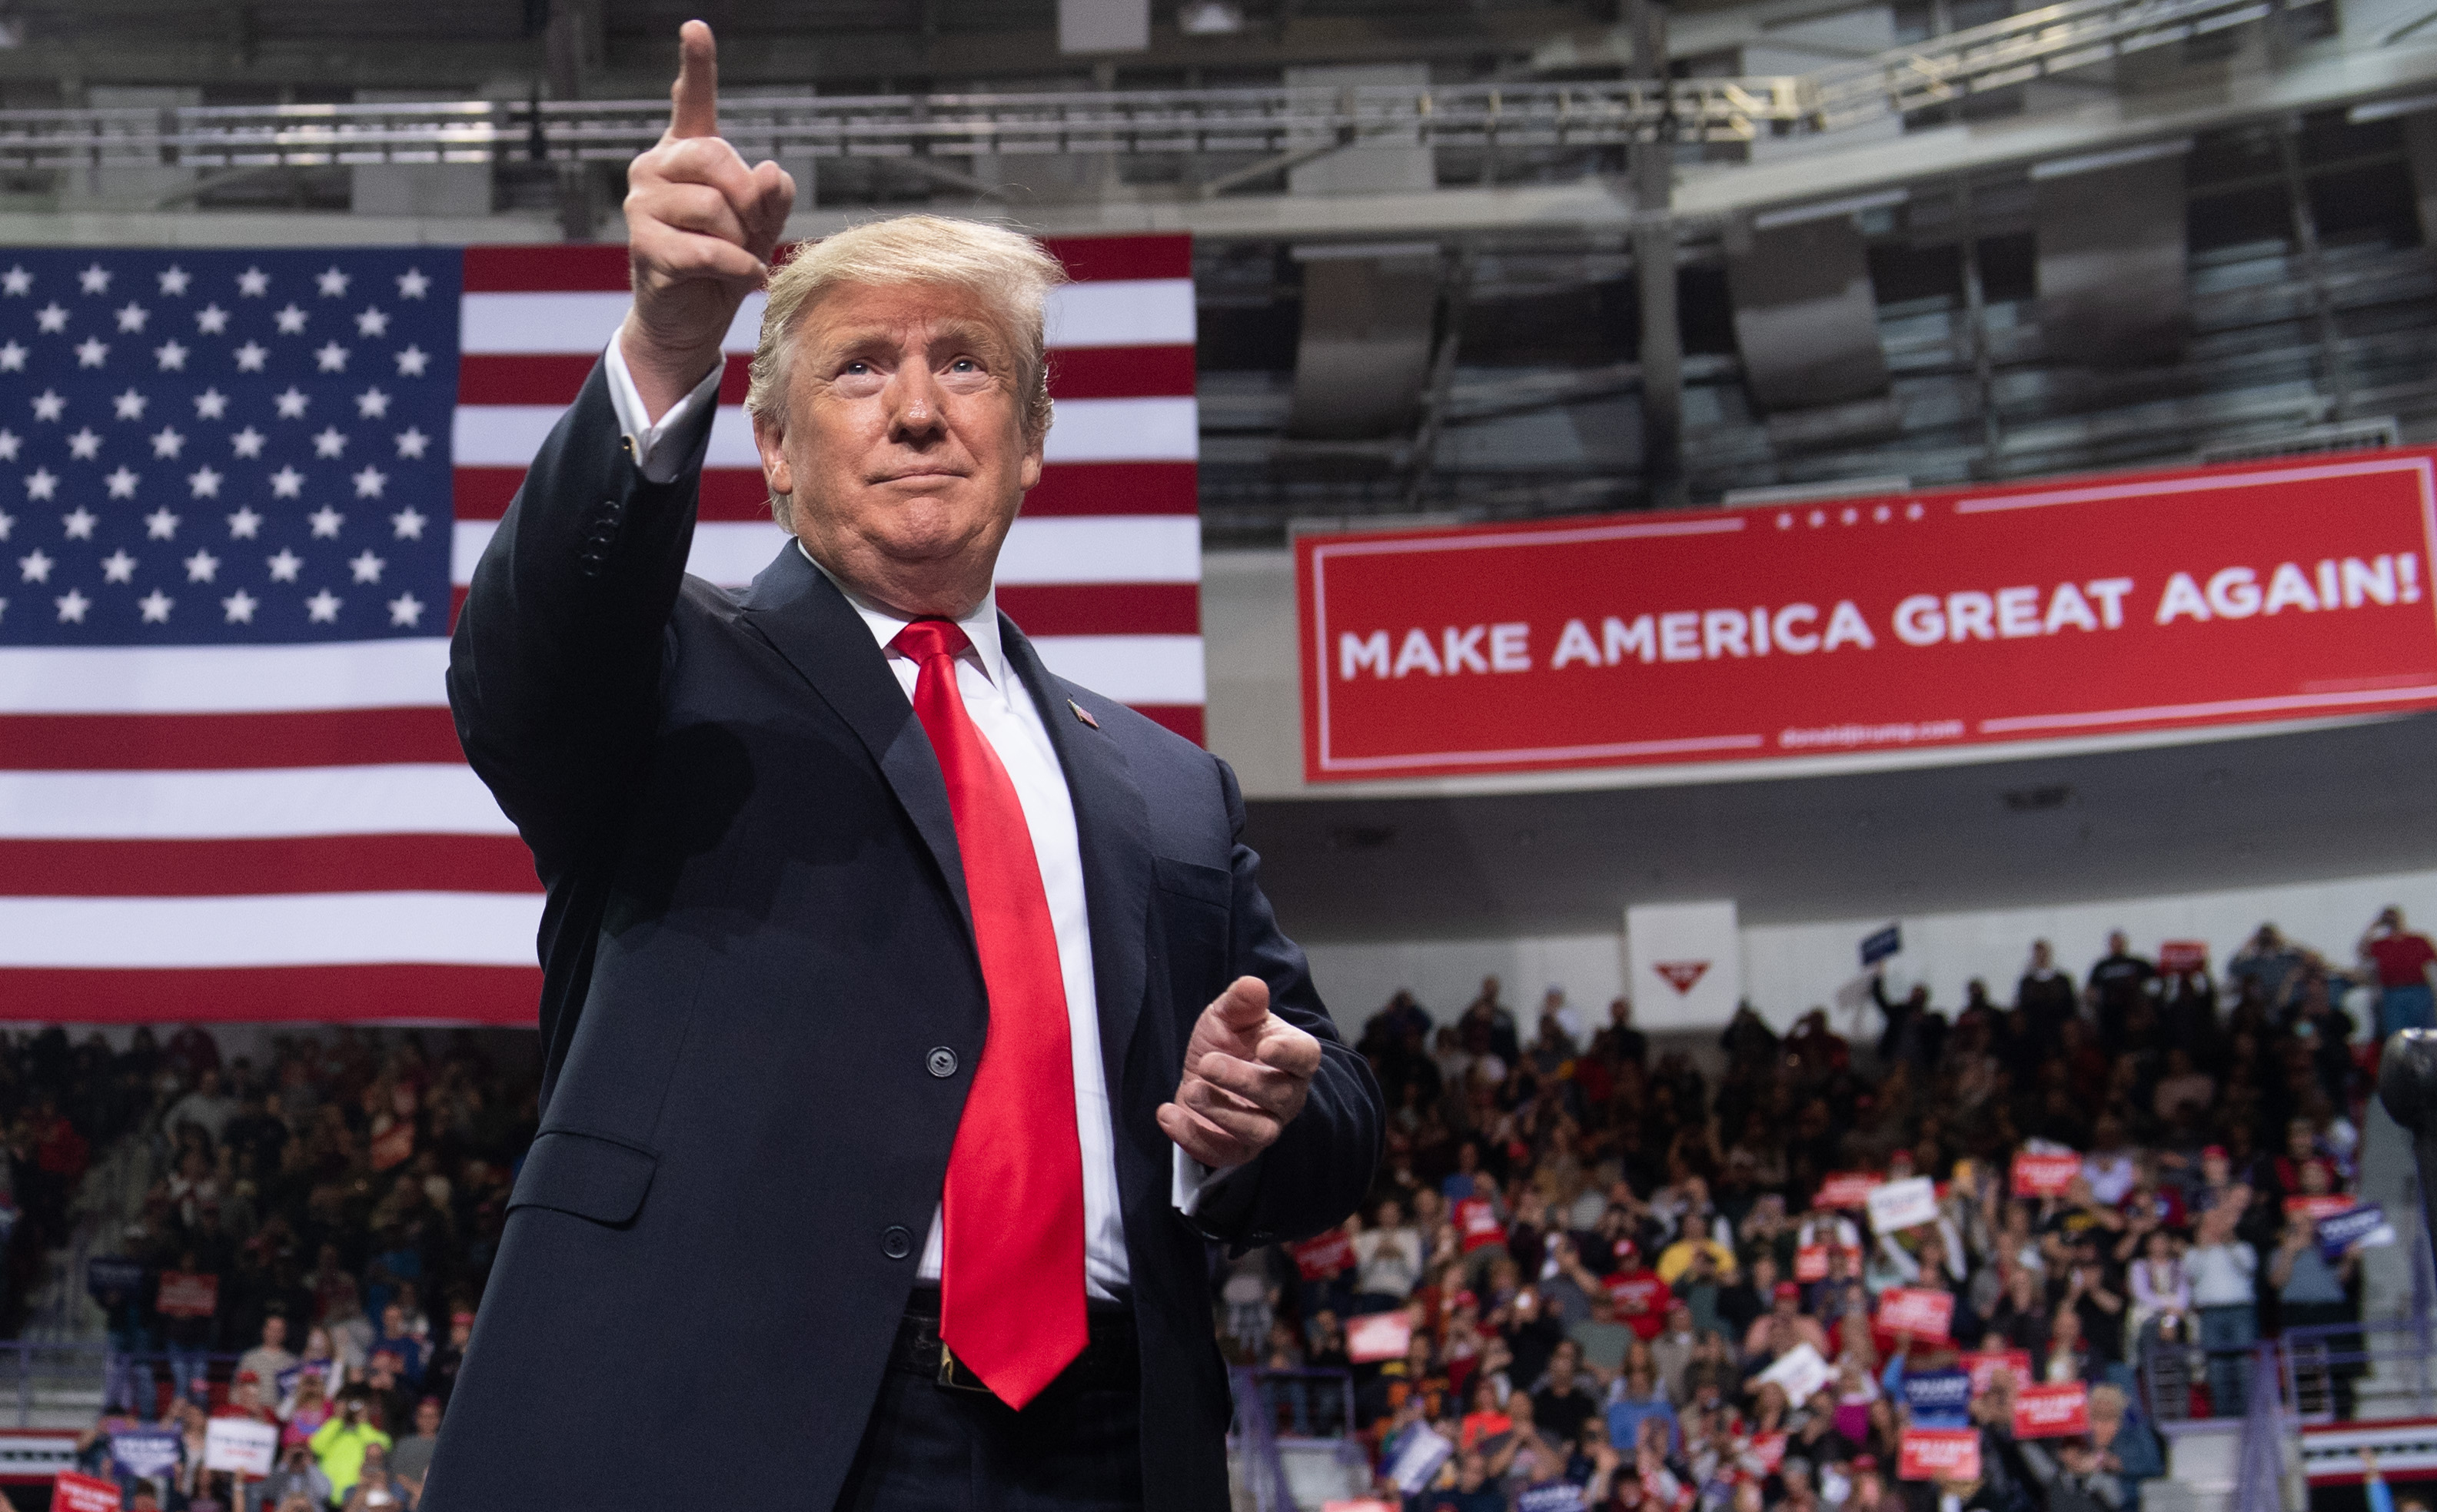 US President Donald Trump gestures during a Make America Great Again rally in Green Bay, Wisconsin, April 27, 2019. (Photo by SAUL LOEB/AFP/Getty Images)